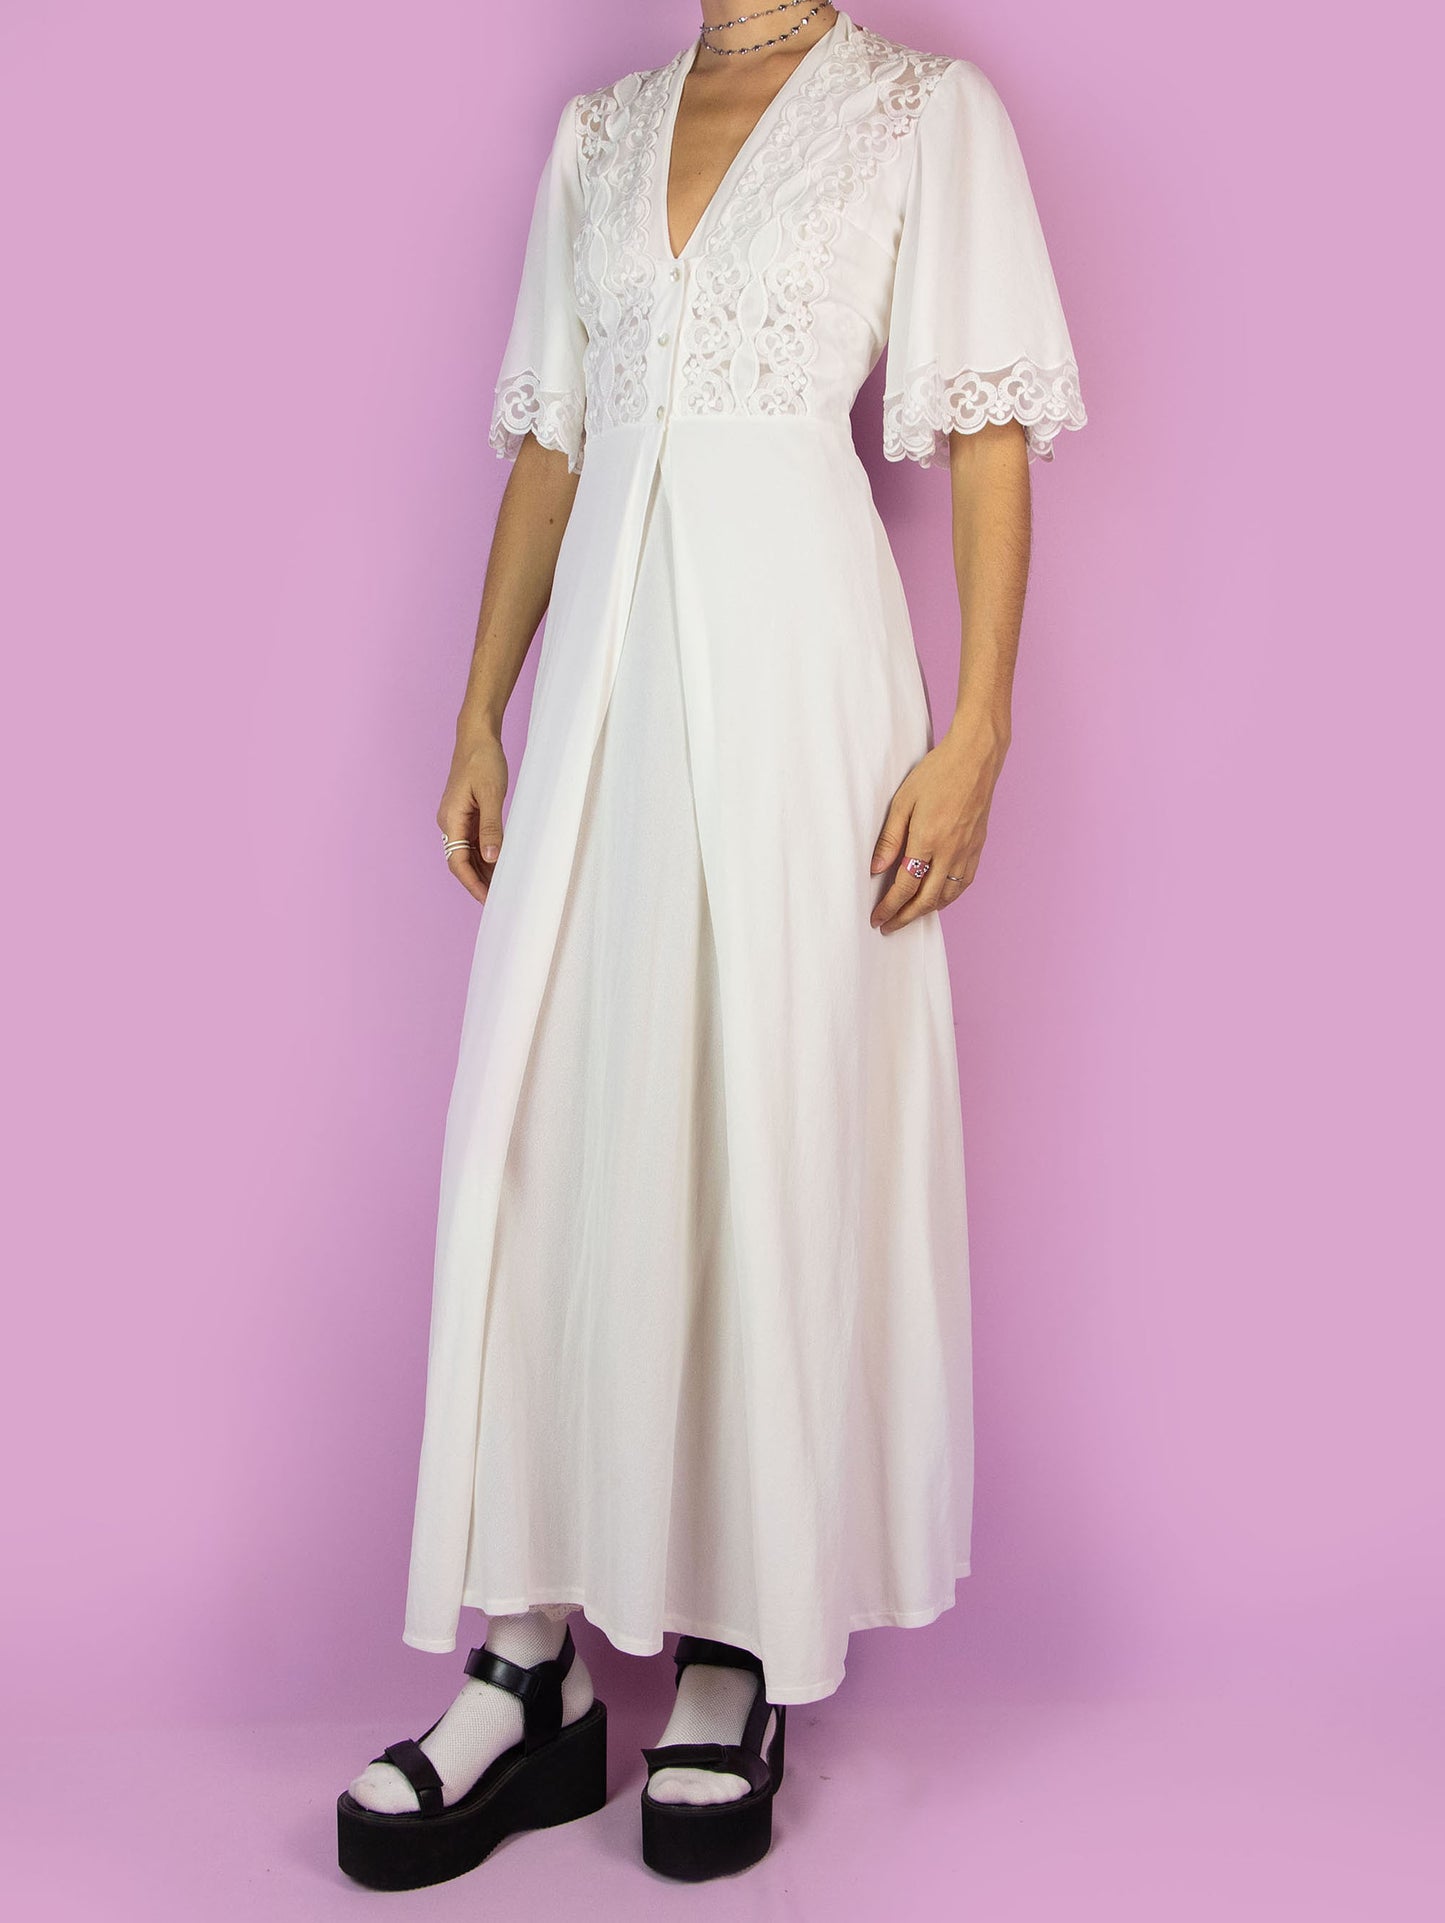 The Vintage 70s White Lace Duster Robe is a long maxi white robe with short sleeves, lace details, and a button closure at the front. Romantic 1970s boho peignoir jacket.